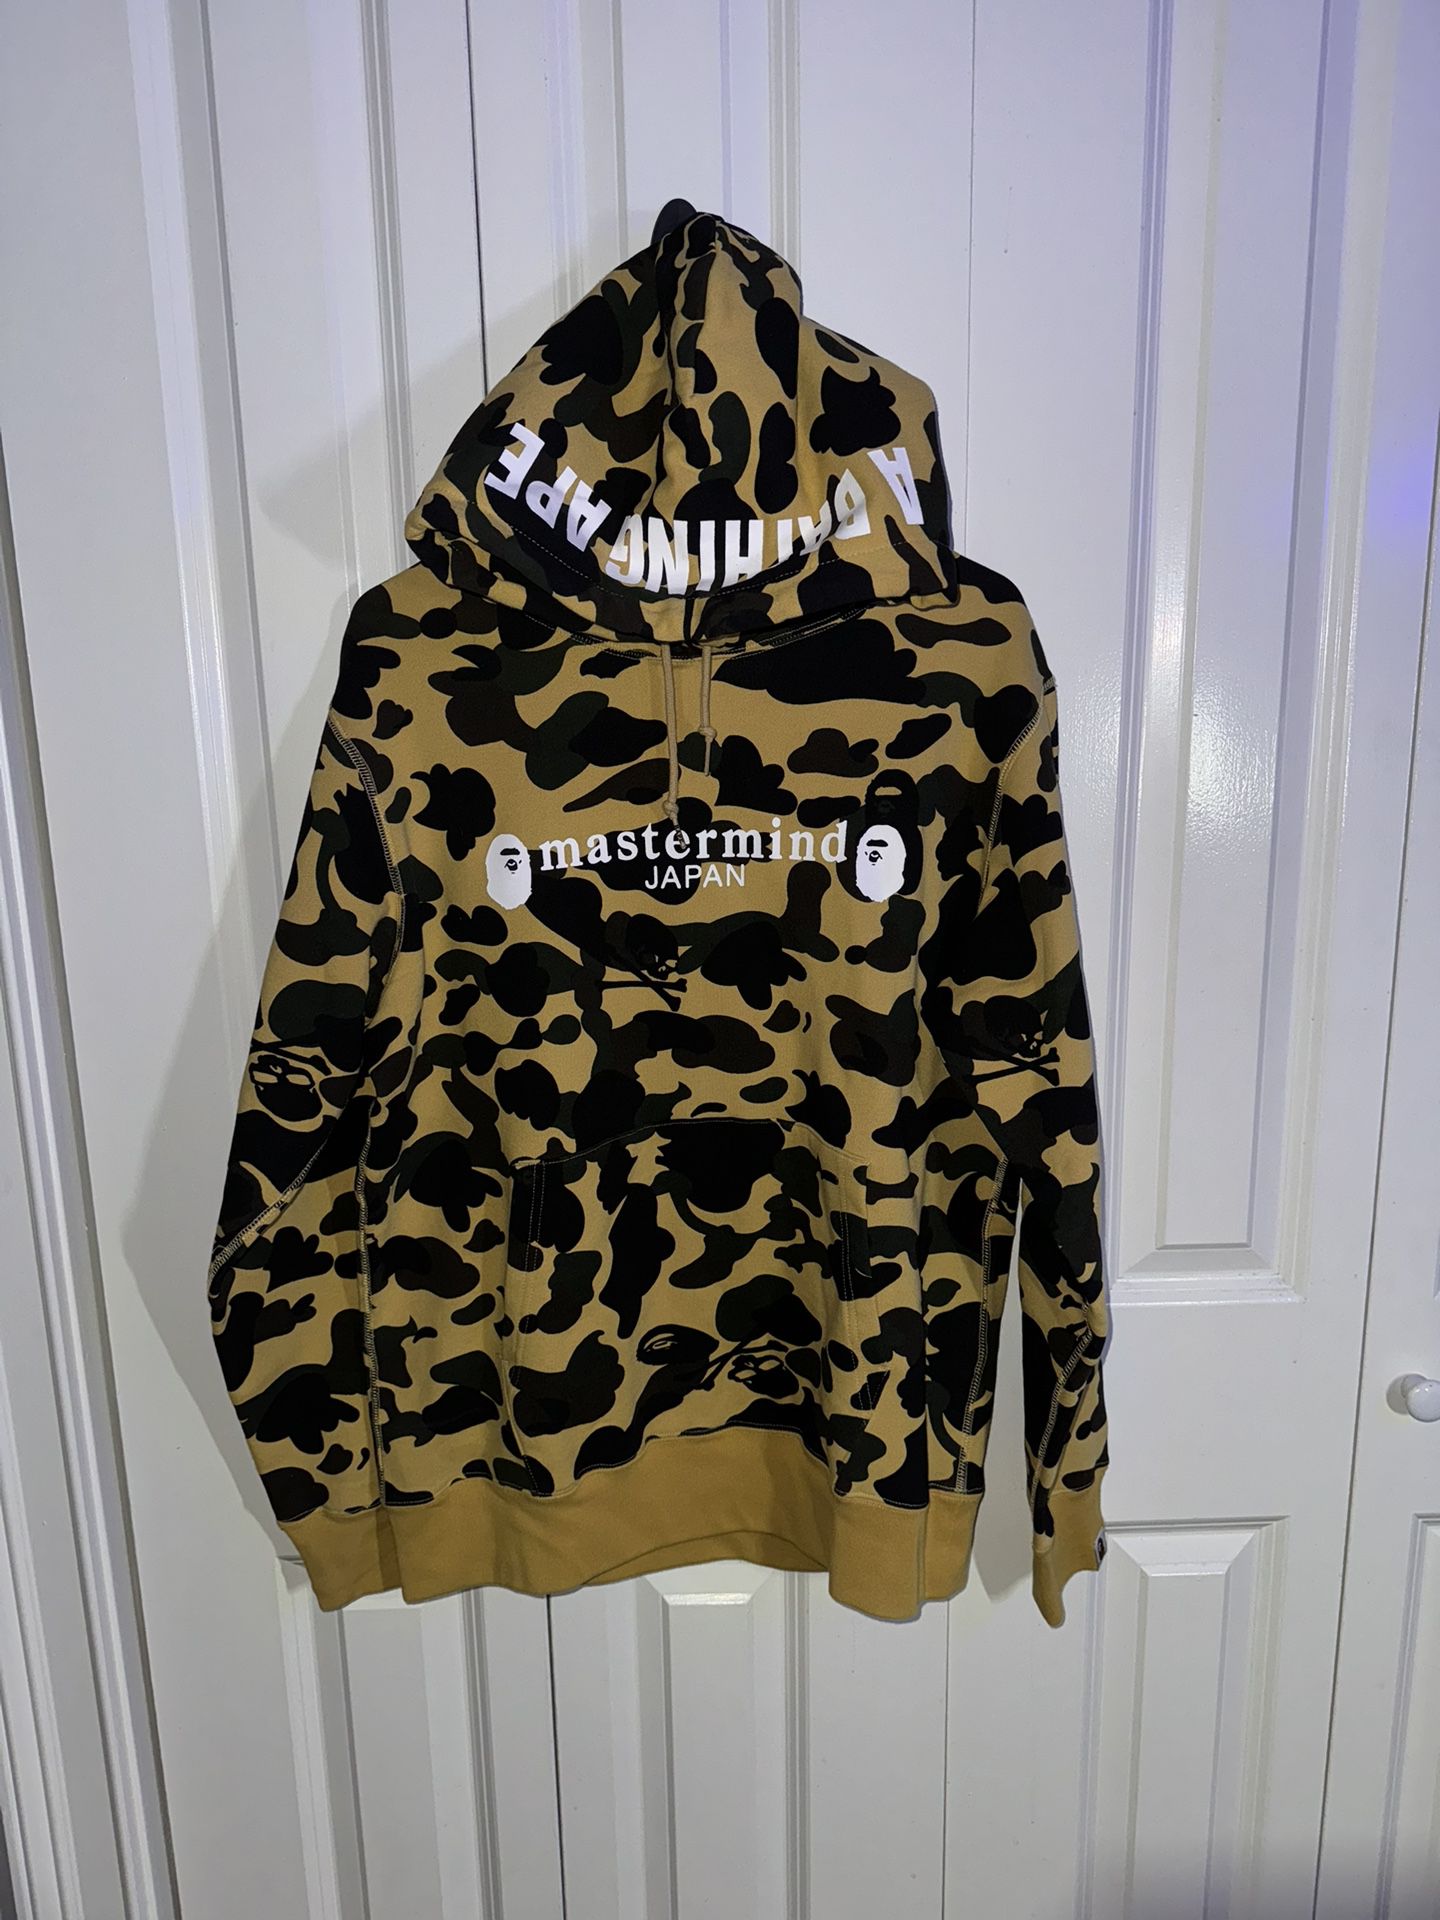 BAPE x Mastermind Japan 1st Camo Embroidered Skull Hoodie Yellow Tan Size L Rep